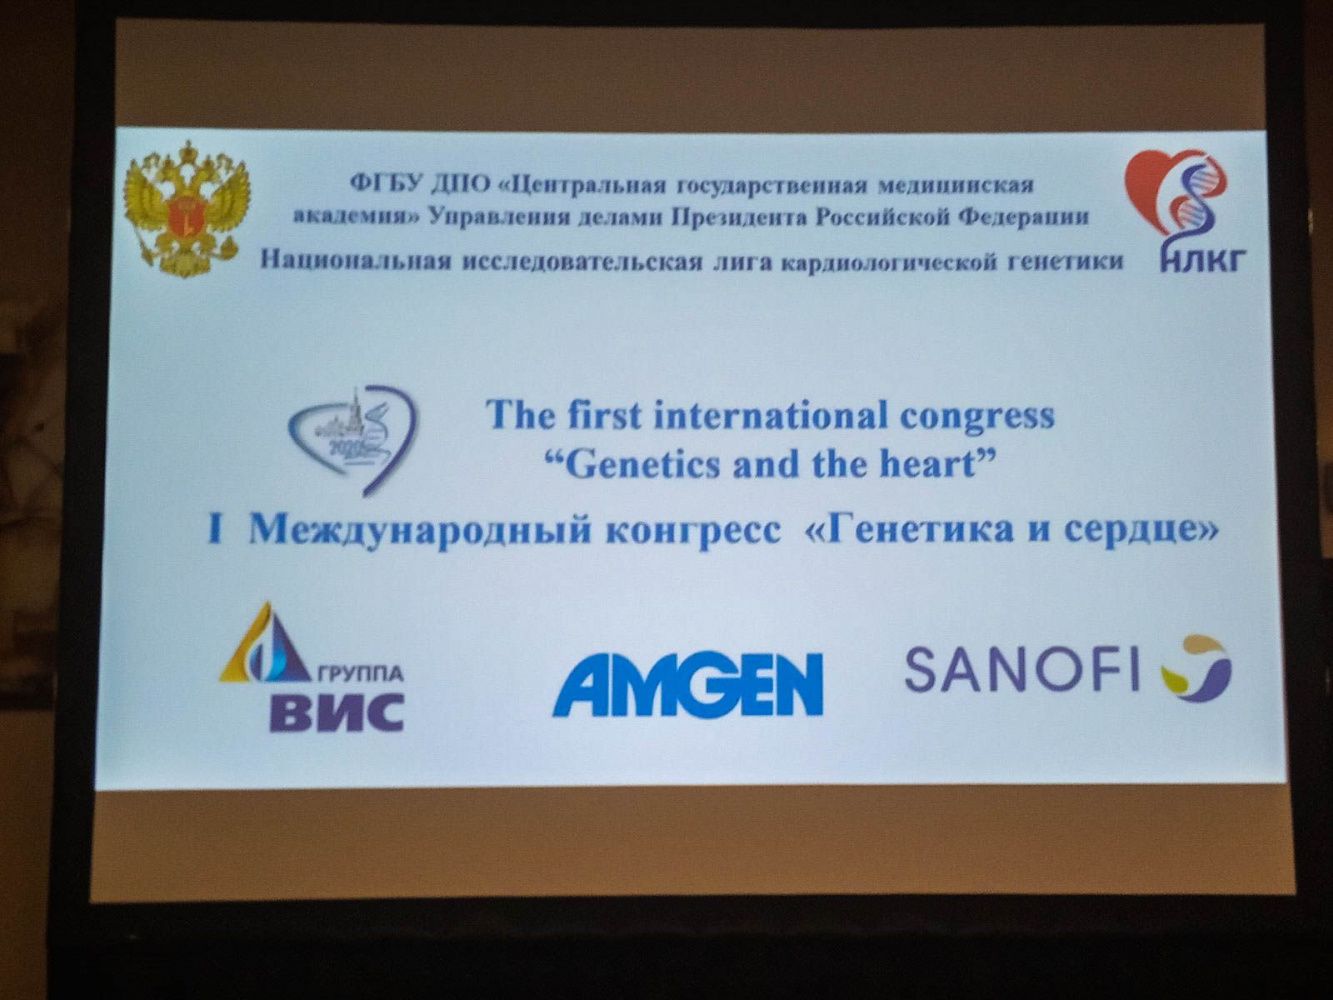 Genetics in diagnostics of cardiovascular diseases was discussed in Moscow